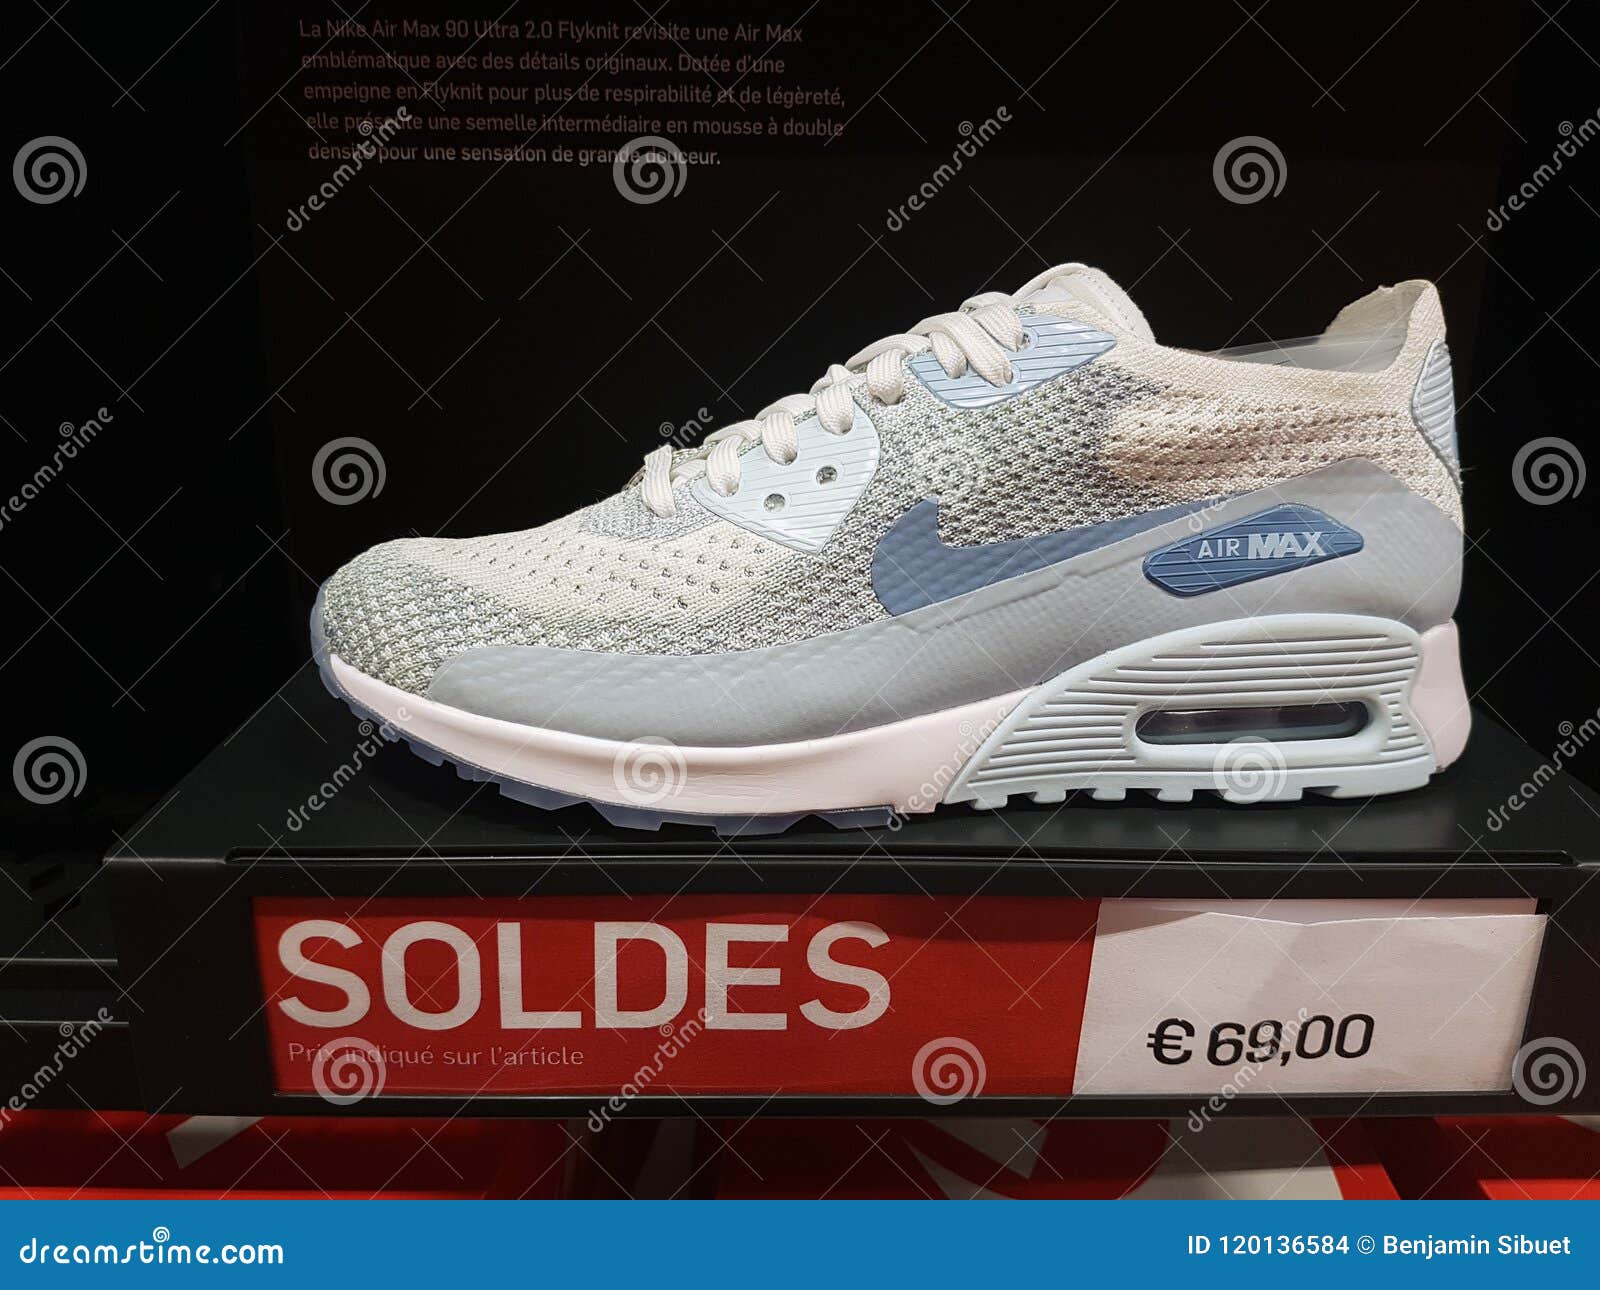 Air Max Shoe on Display Editorial Stock Image - Image of colorful, gray: 120136584